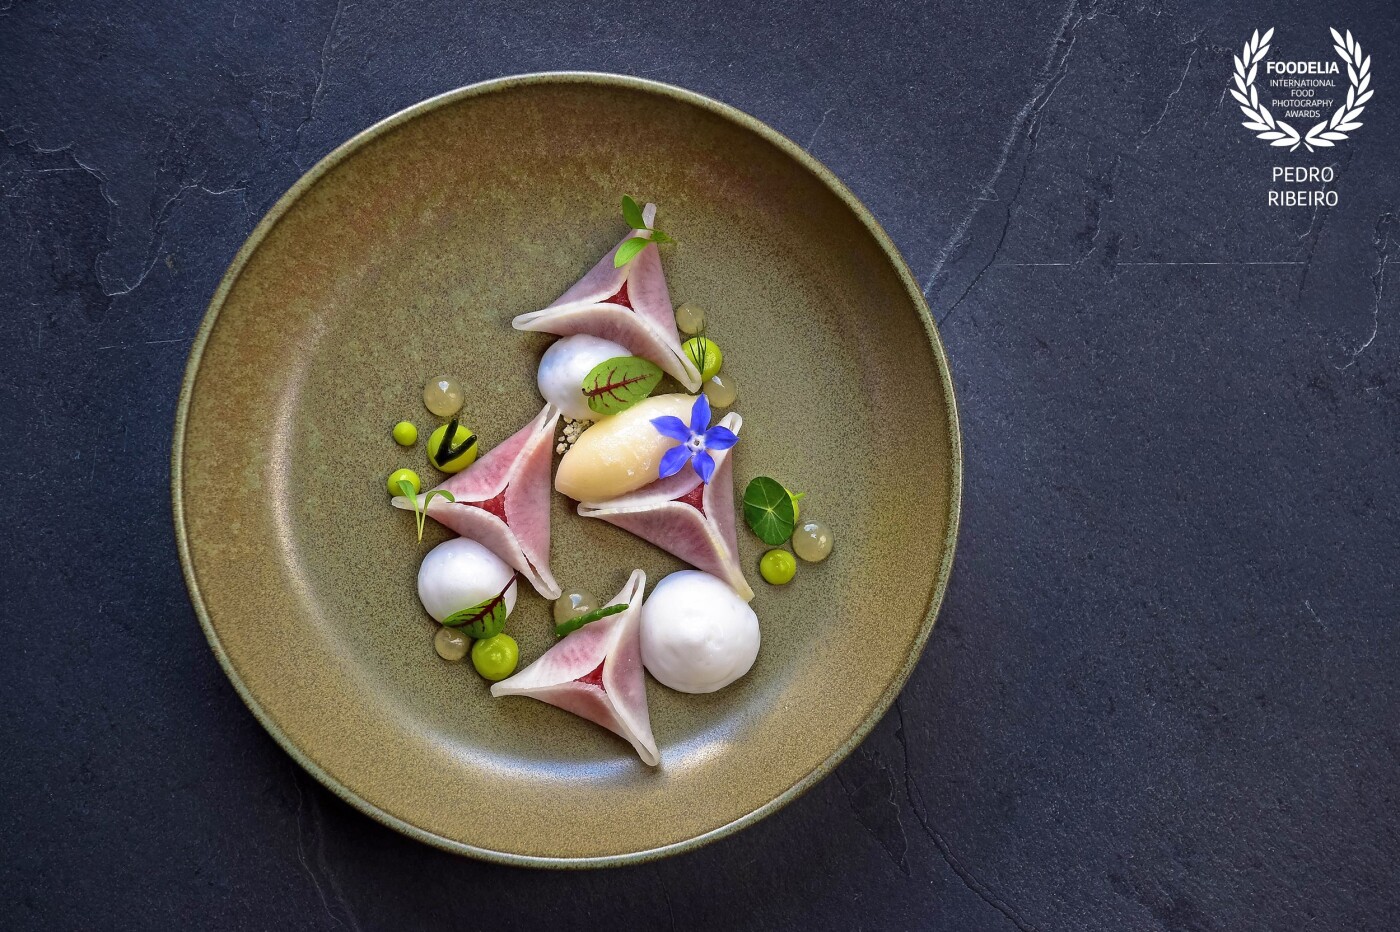 This image was made while visiting the one star Michelin restaurant Casa da Calçada, in Amarante, Portugal.<br />
This menu with sea inspiration was create by Michelin star chef Tiago Bonito. 